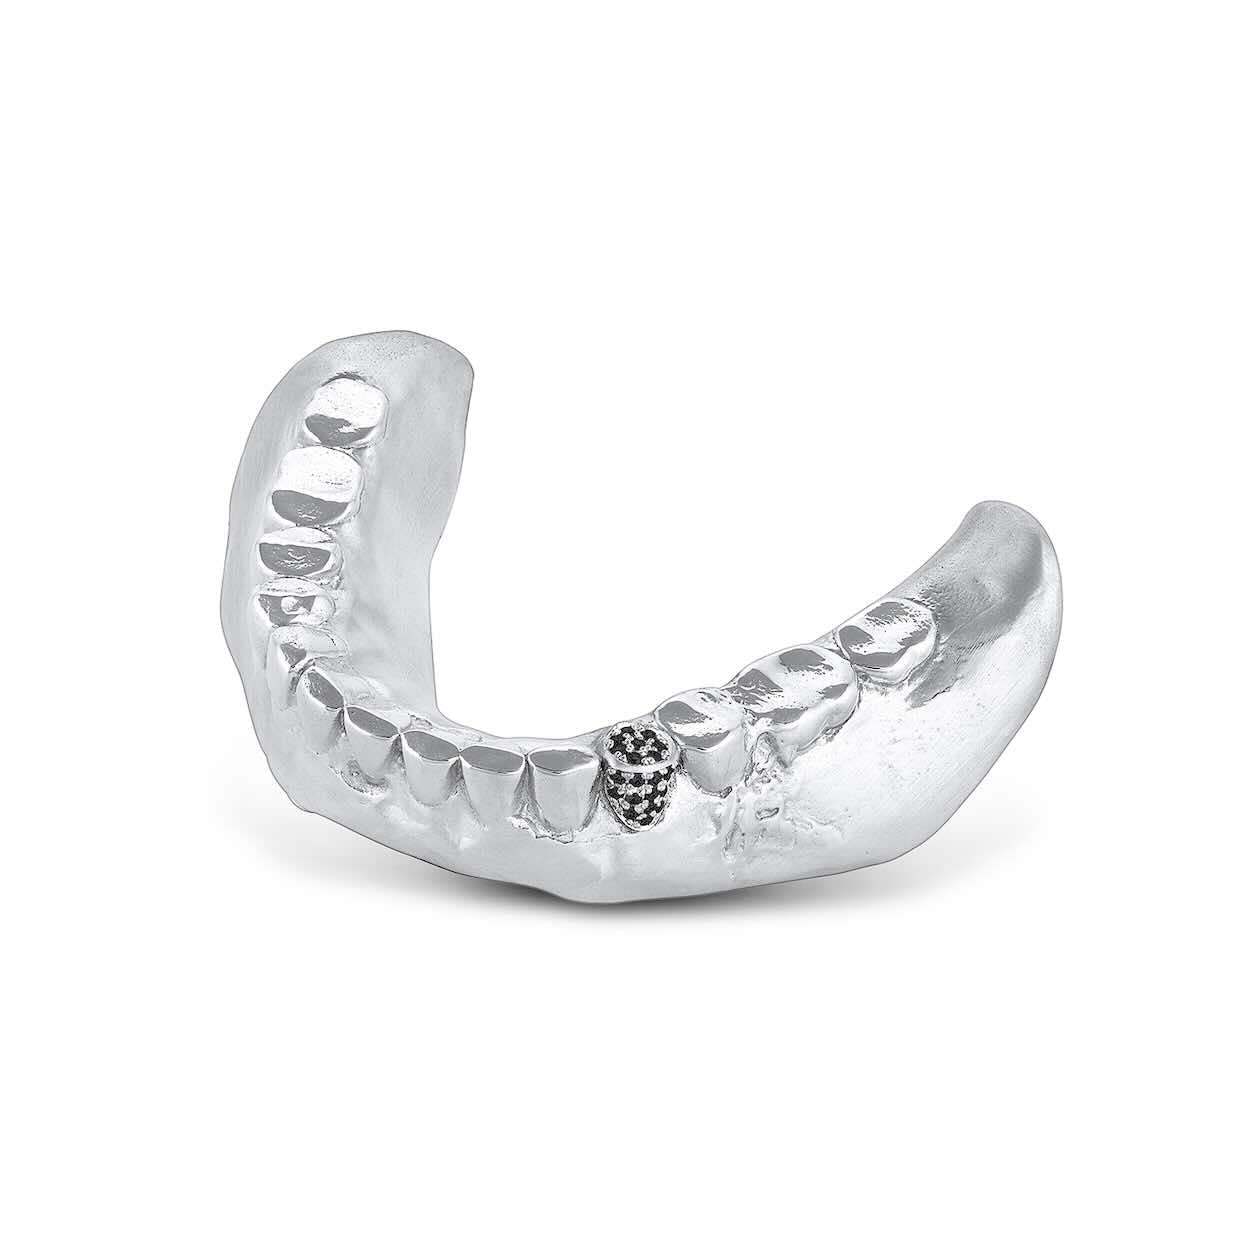 Denture Paperweight – EMBLM Fine Jewelry